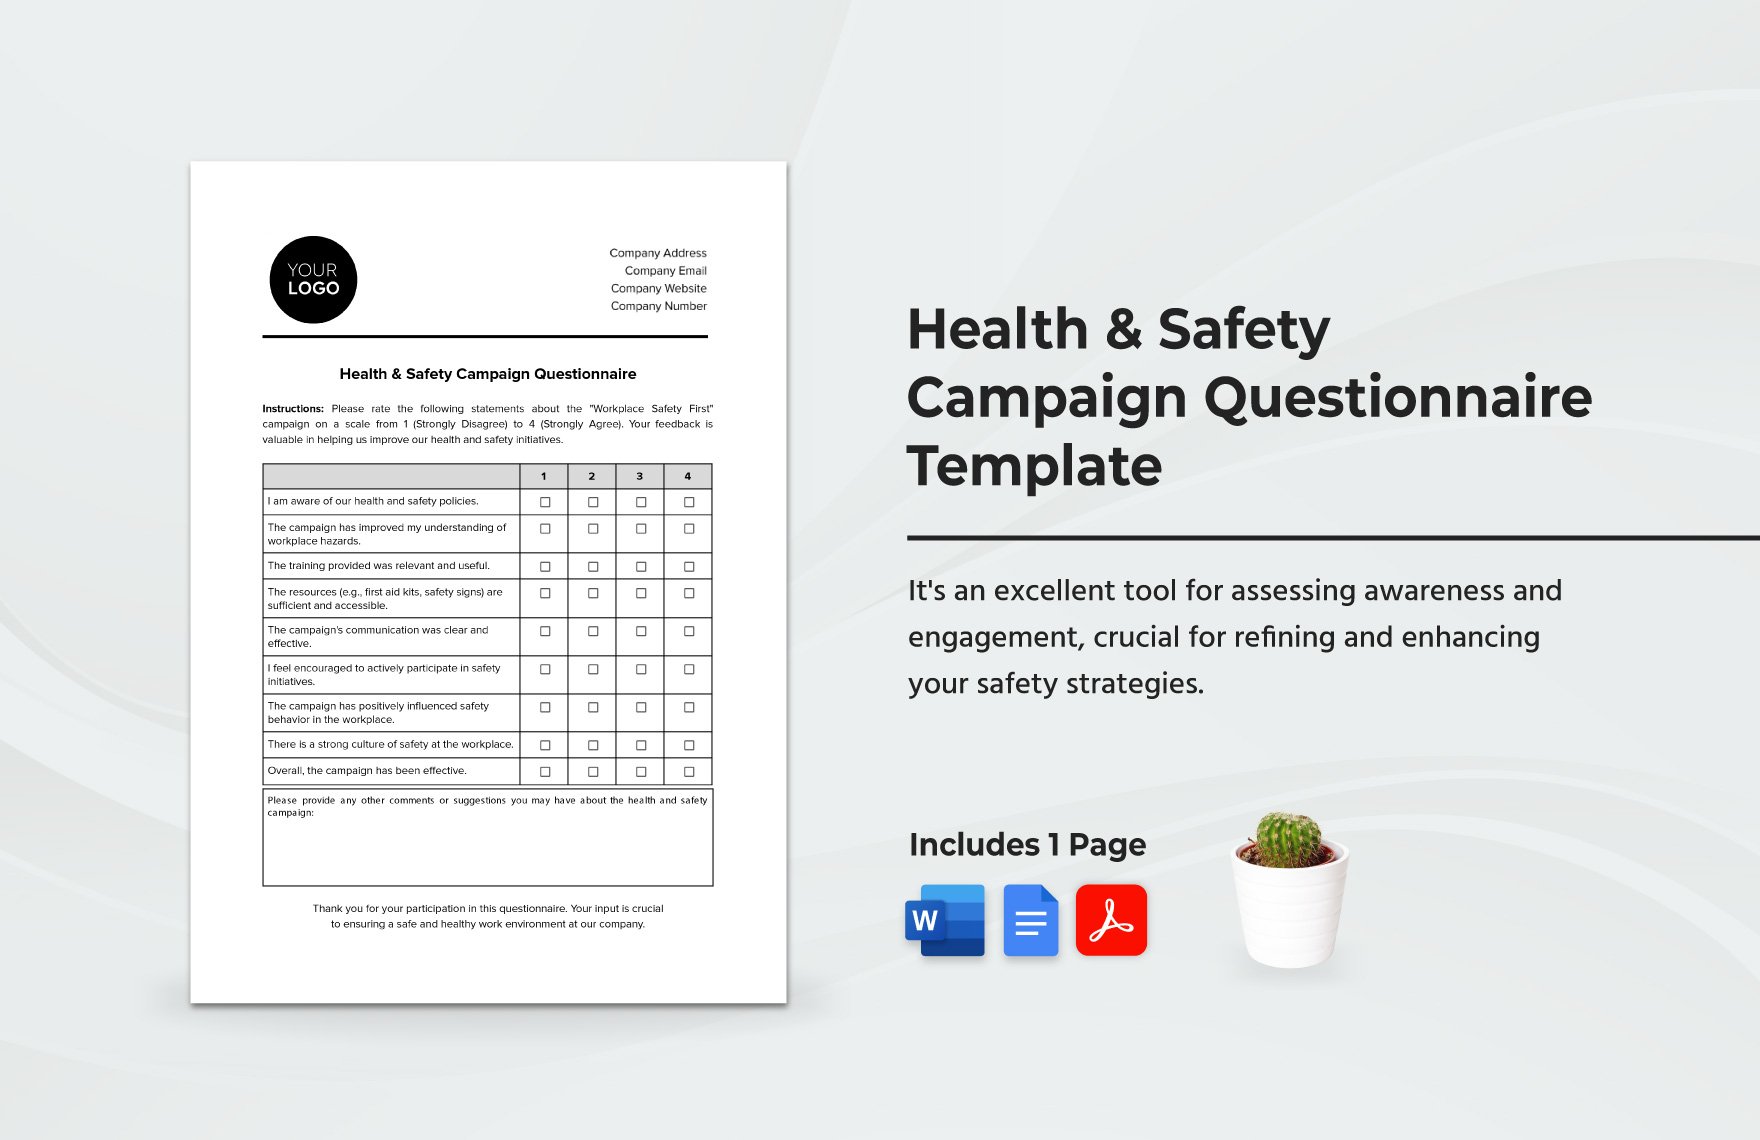 Health & Safety Campaign Questionnaire Template